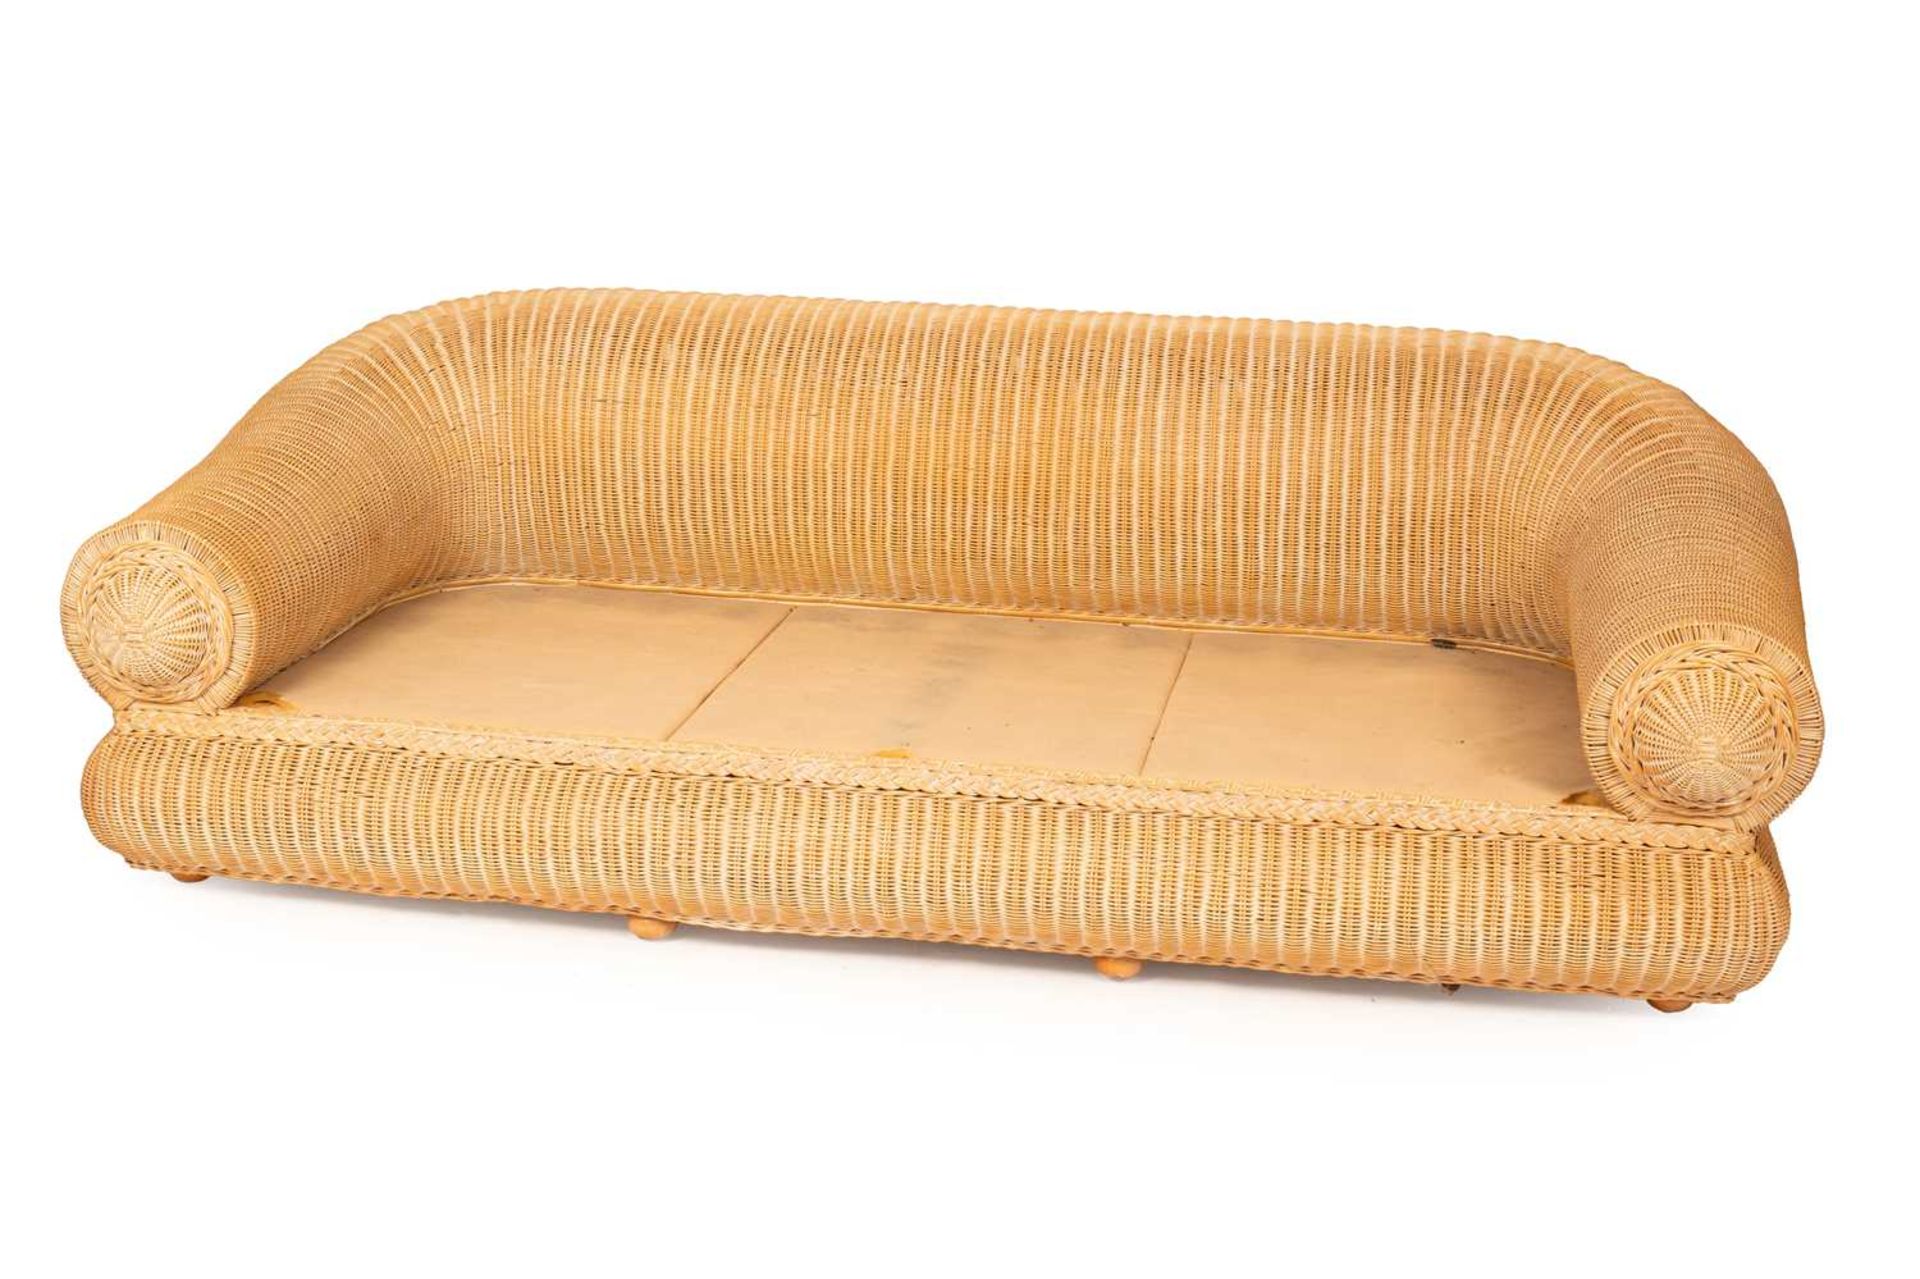 POINT FURNITURE - MODERNIST LARGE RATTAN SOFA SETTEE - Image 2 of 2